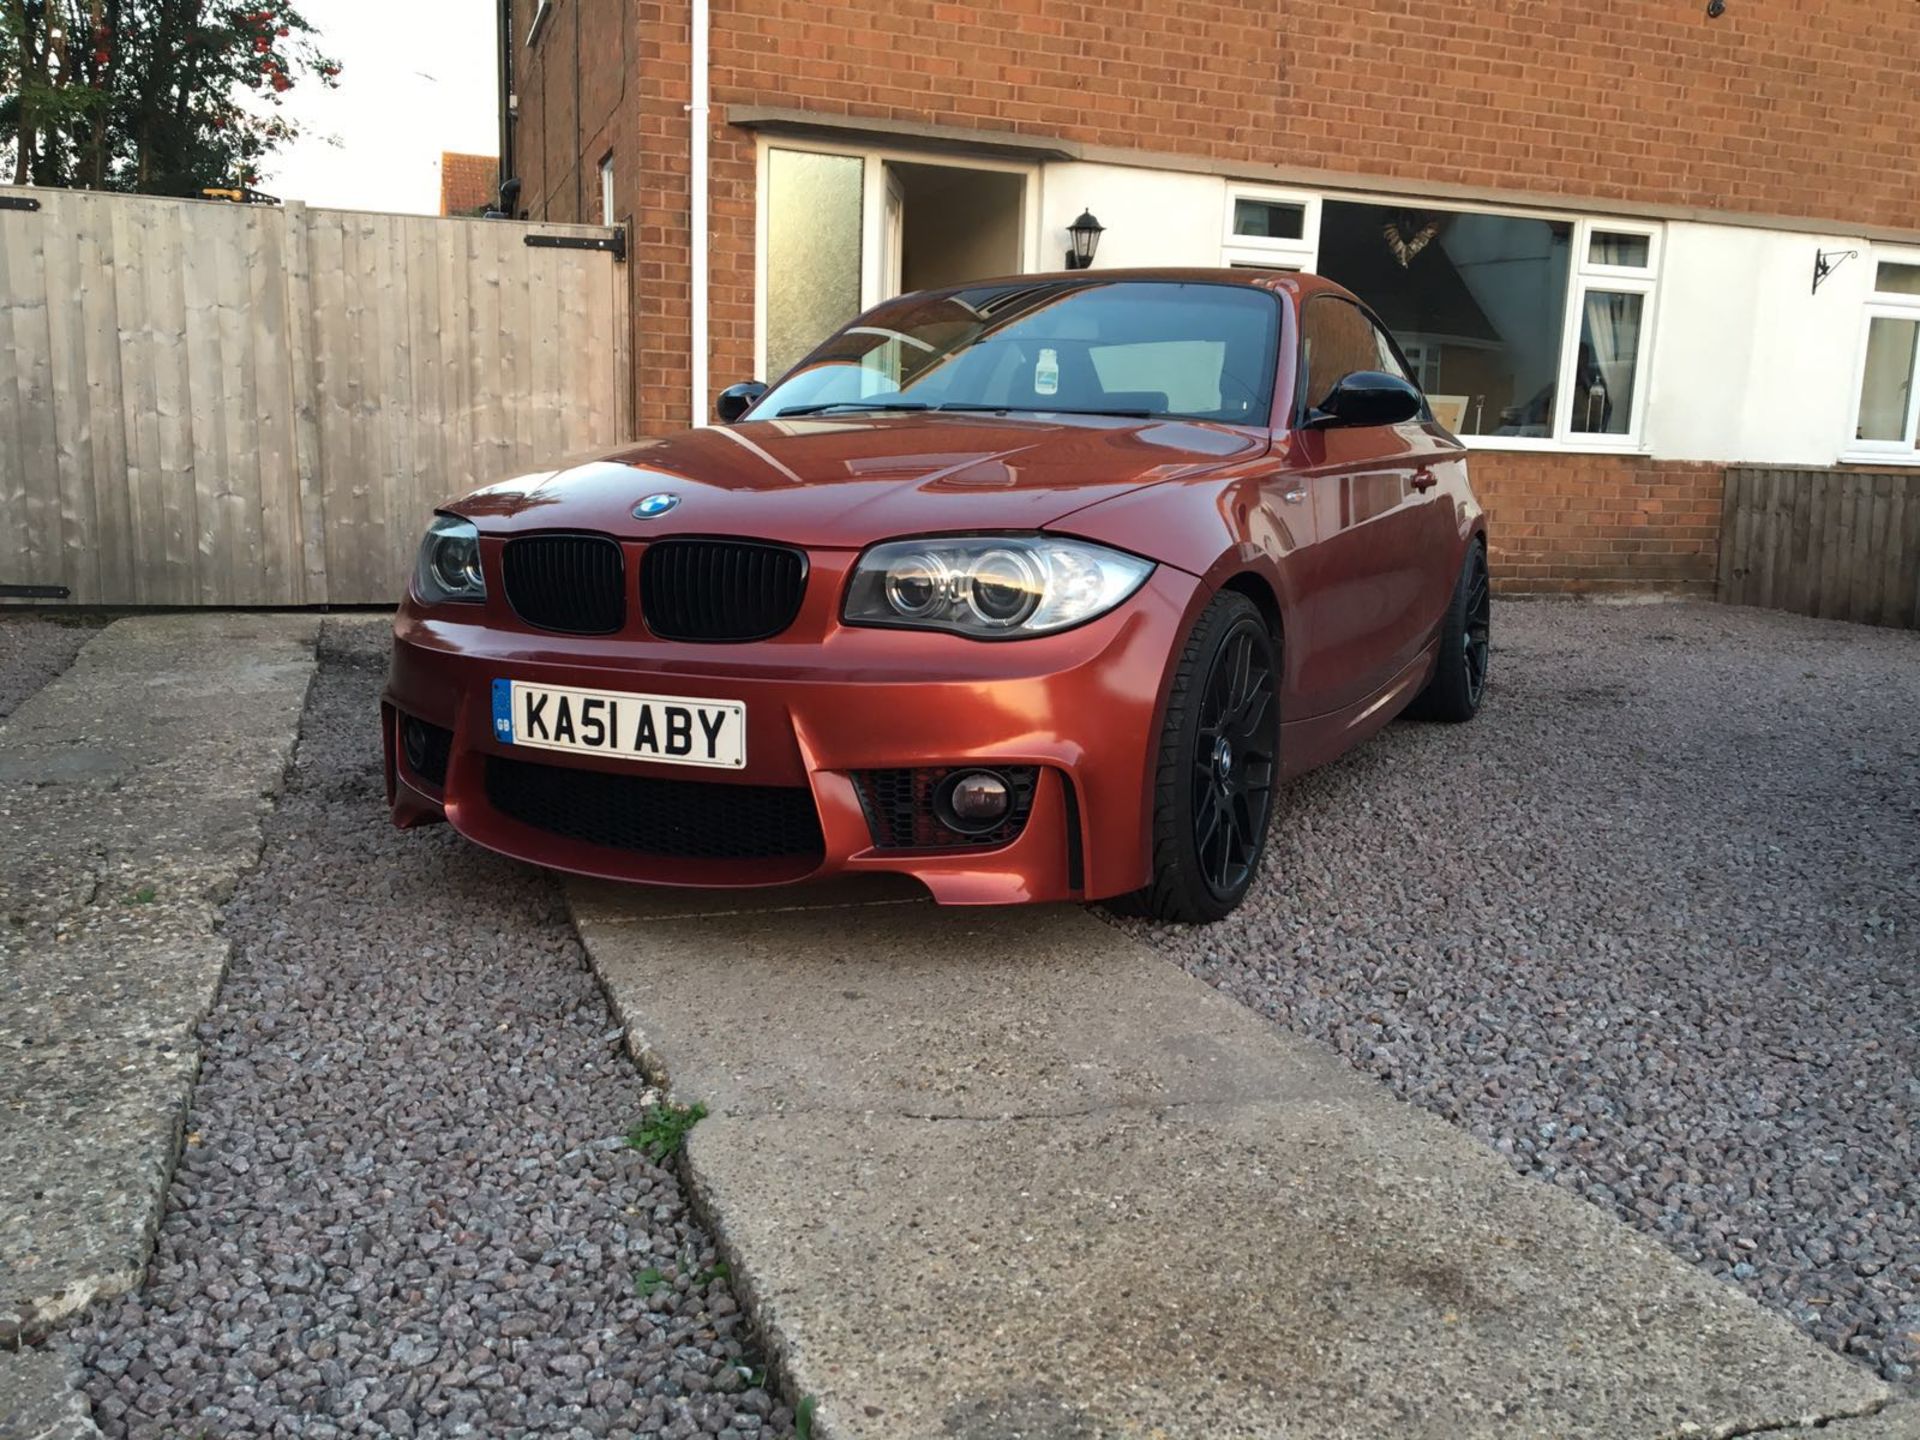 2008 BMW 123D M SPORT COUPE - 6 SPEED MANUAL GEARBOX *NO VAT*